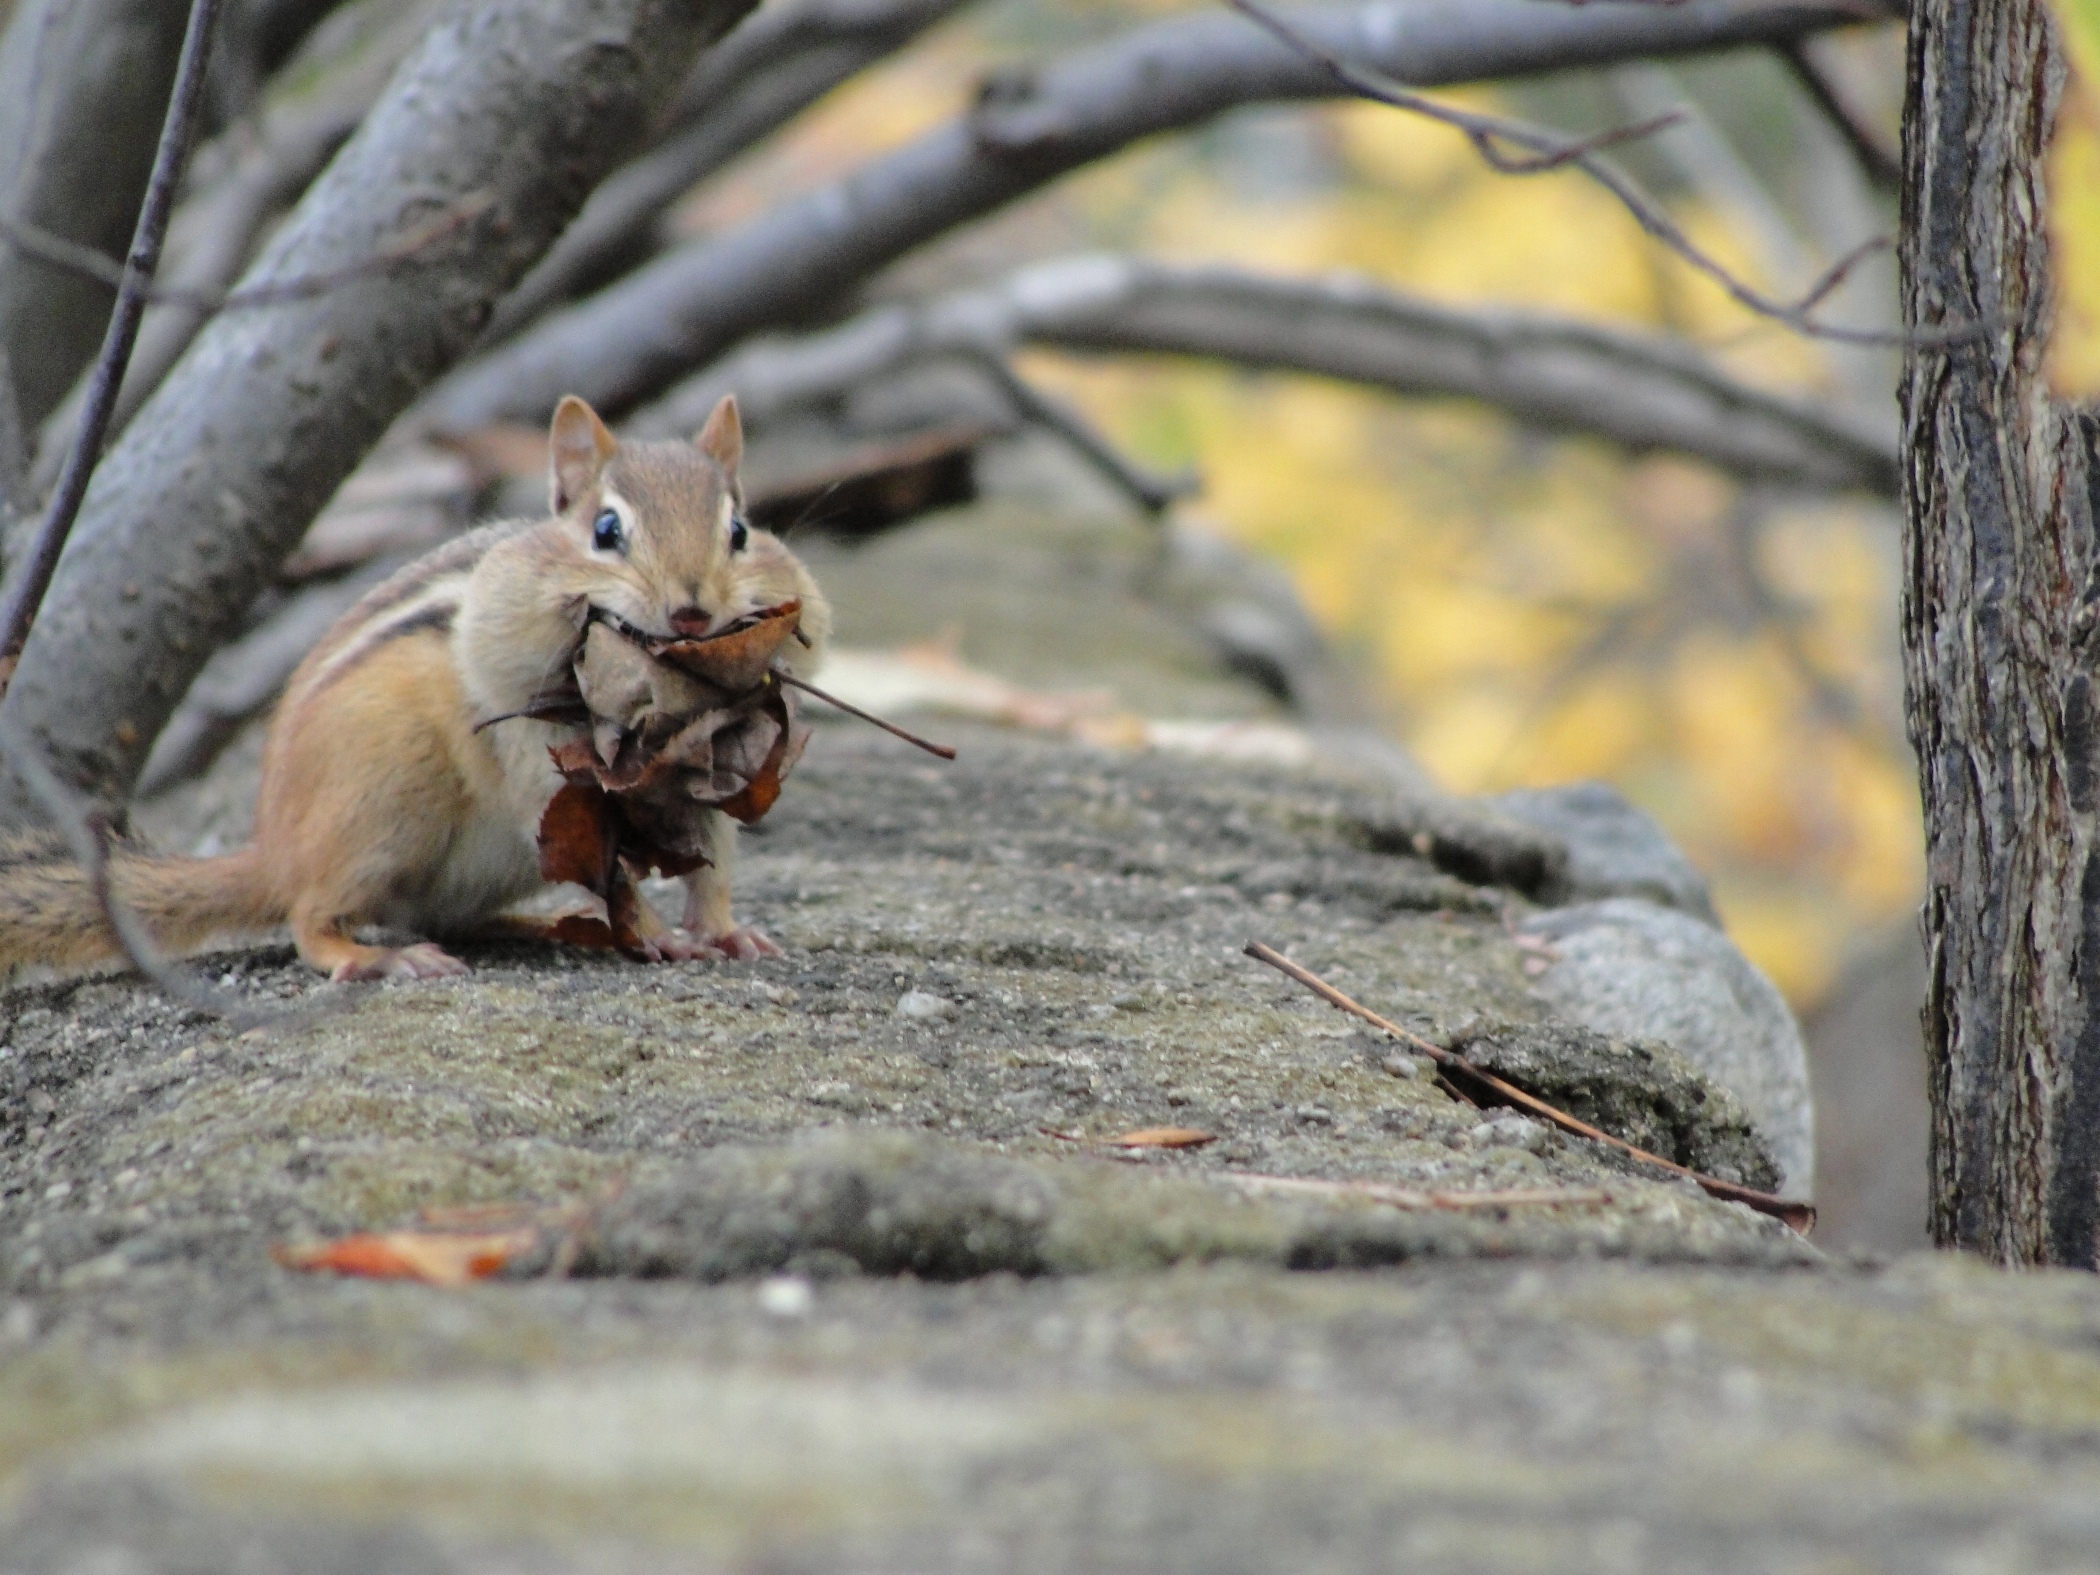 Nesting Chipmunk (user submitted)